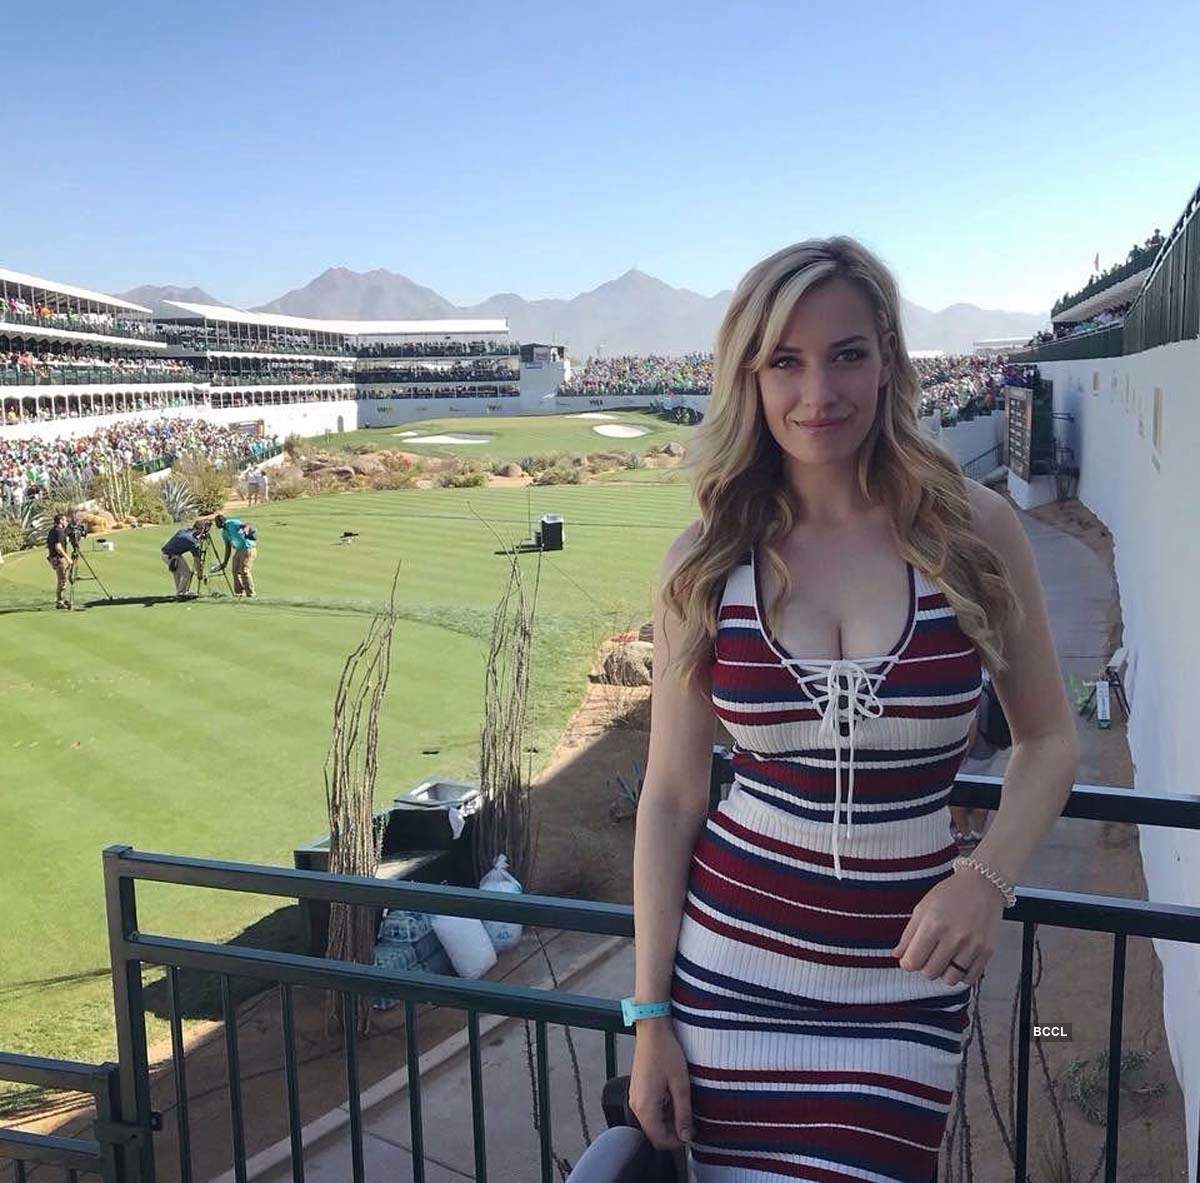 <BR> dubbed as 'the world's hottest golfer' will make your jaw-drop in these pictures